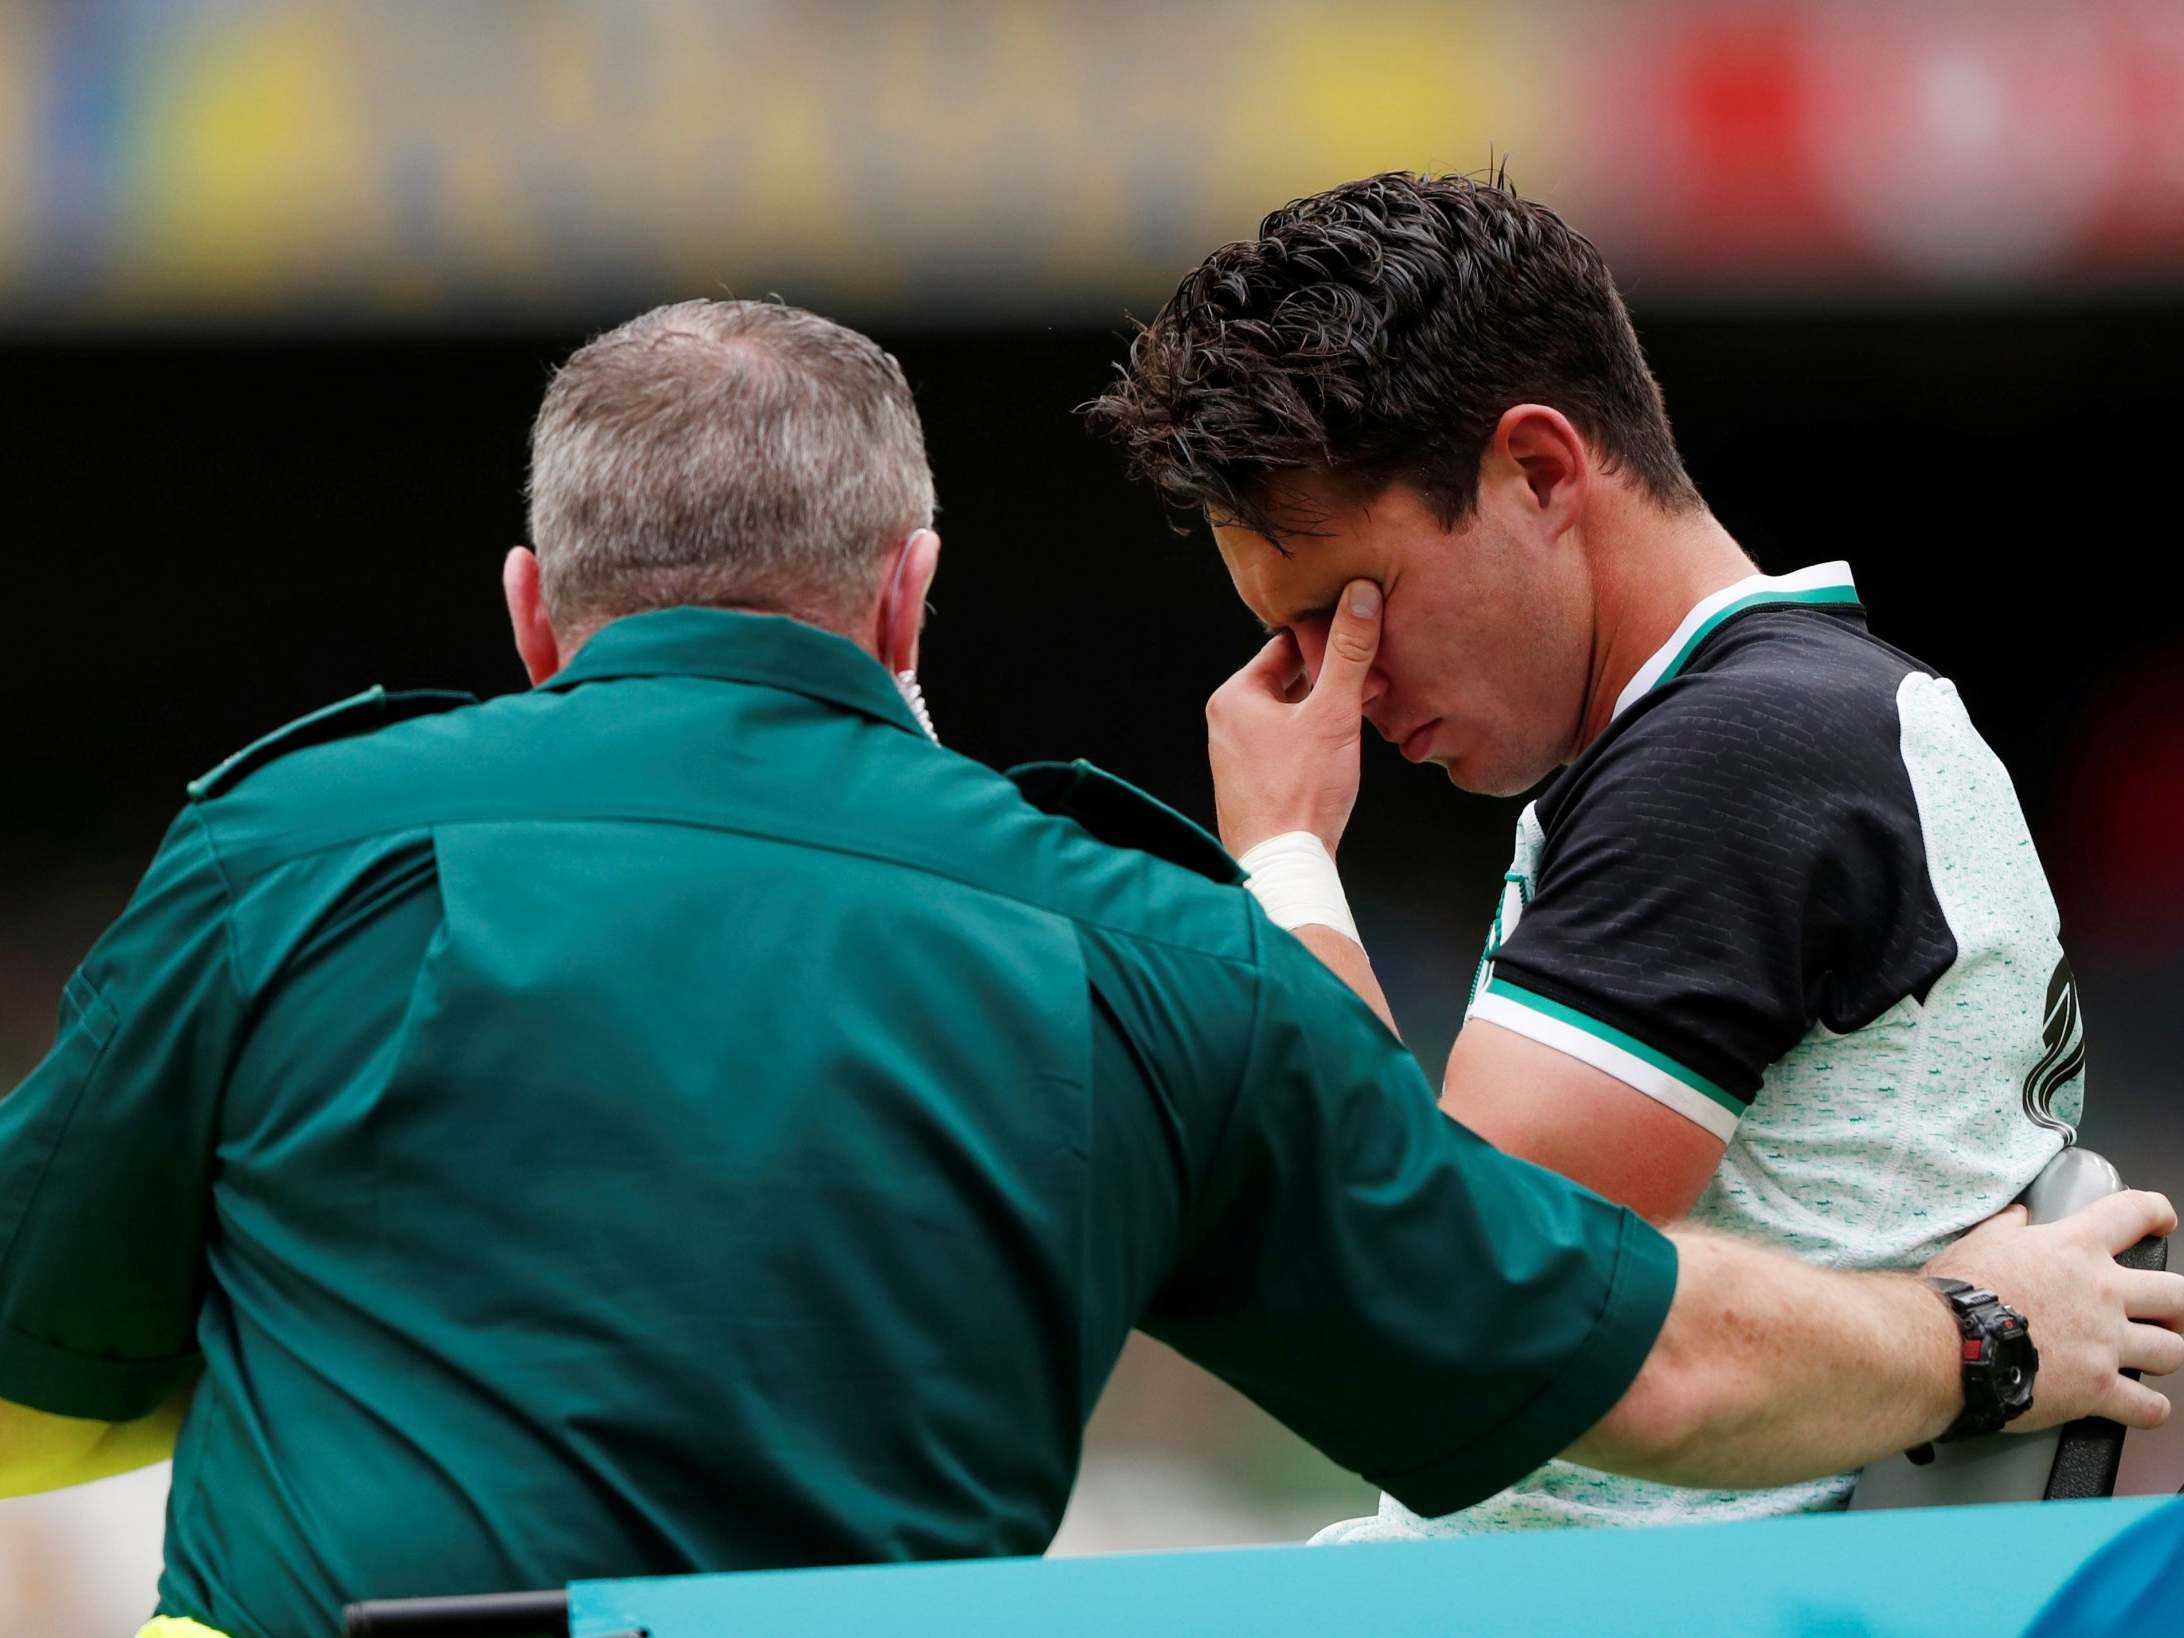 Joey Carbery leaves the Aviva stadium pitch on a cart after injuring his left ankle